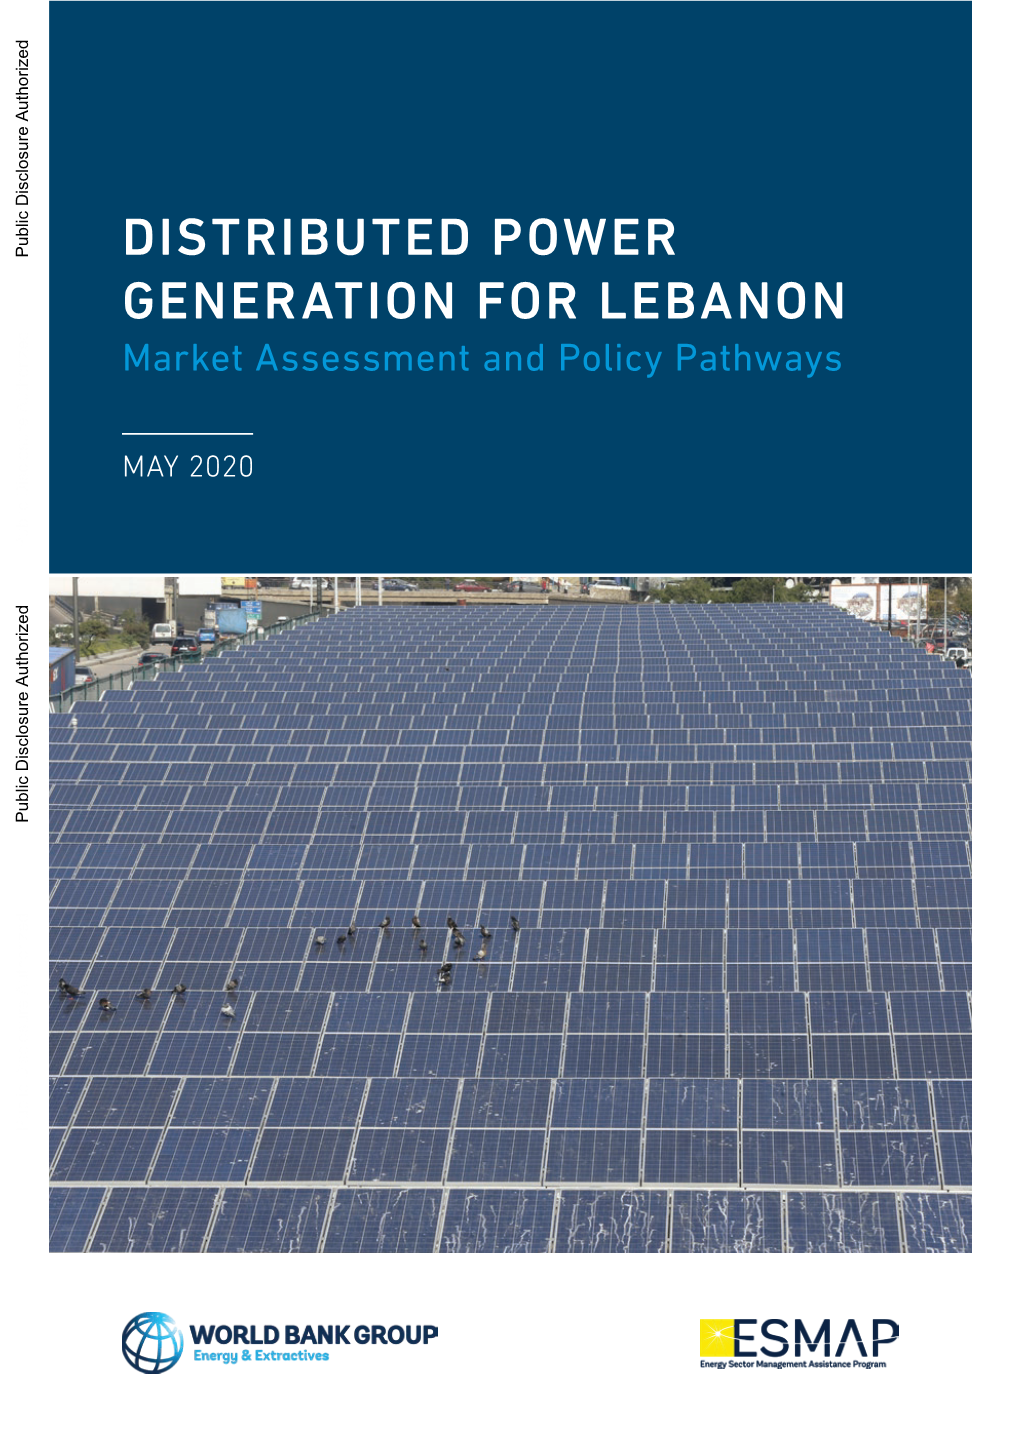 DISTRIBUTED POWER GENERATION for LEBANON Market Assessment and Policy Pathways